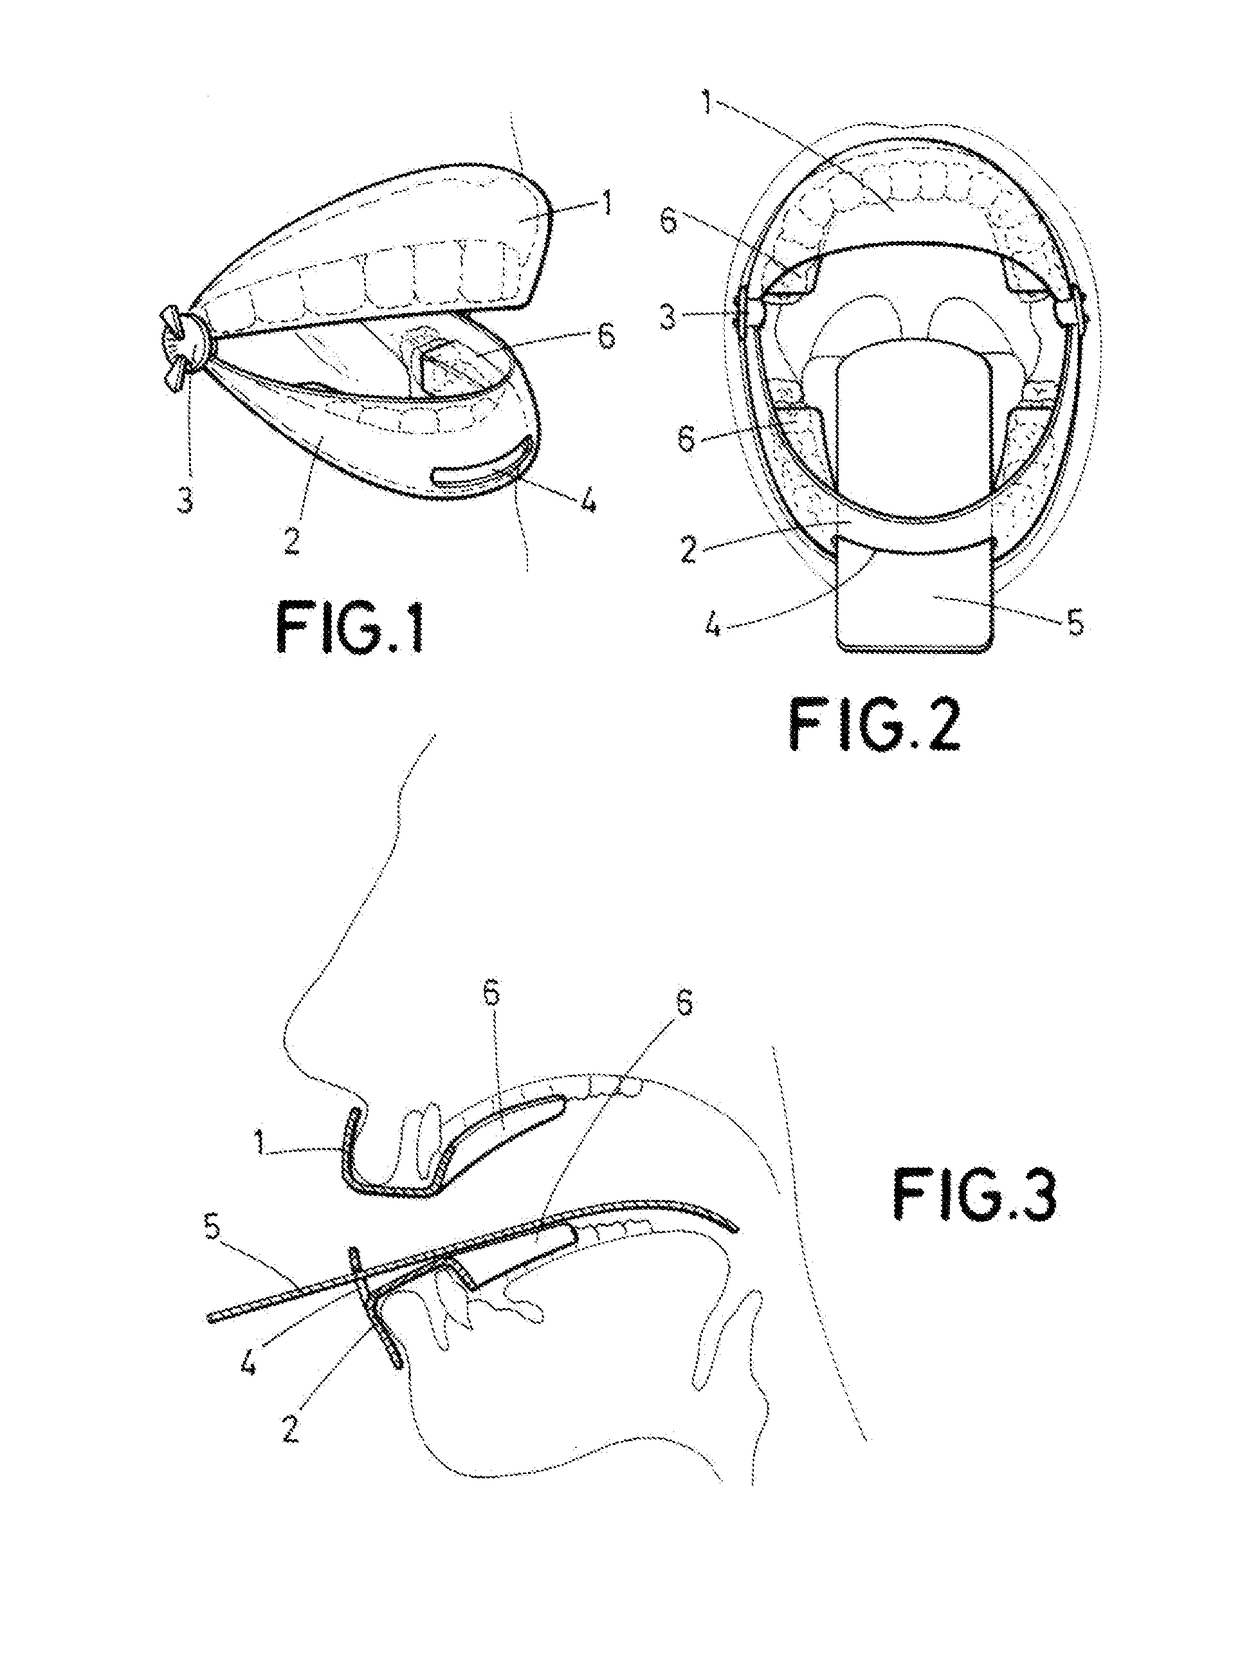 Mouth protector device with tongue depressor